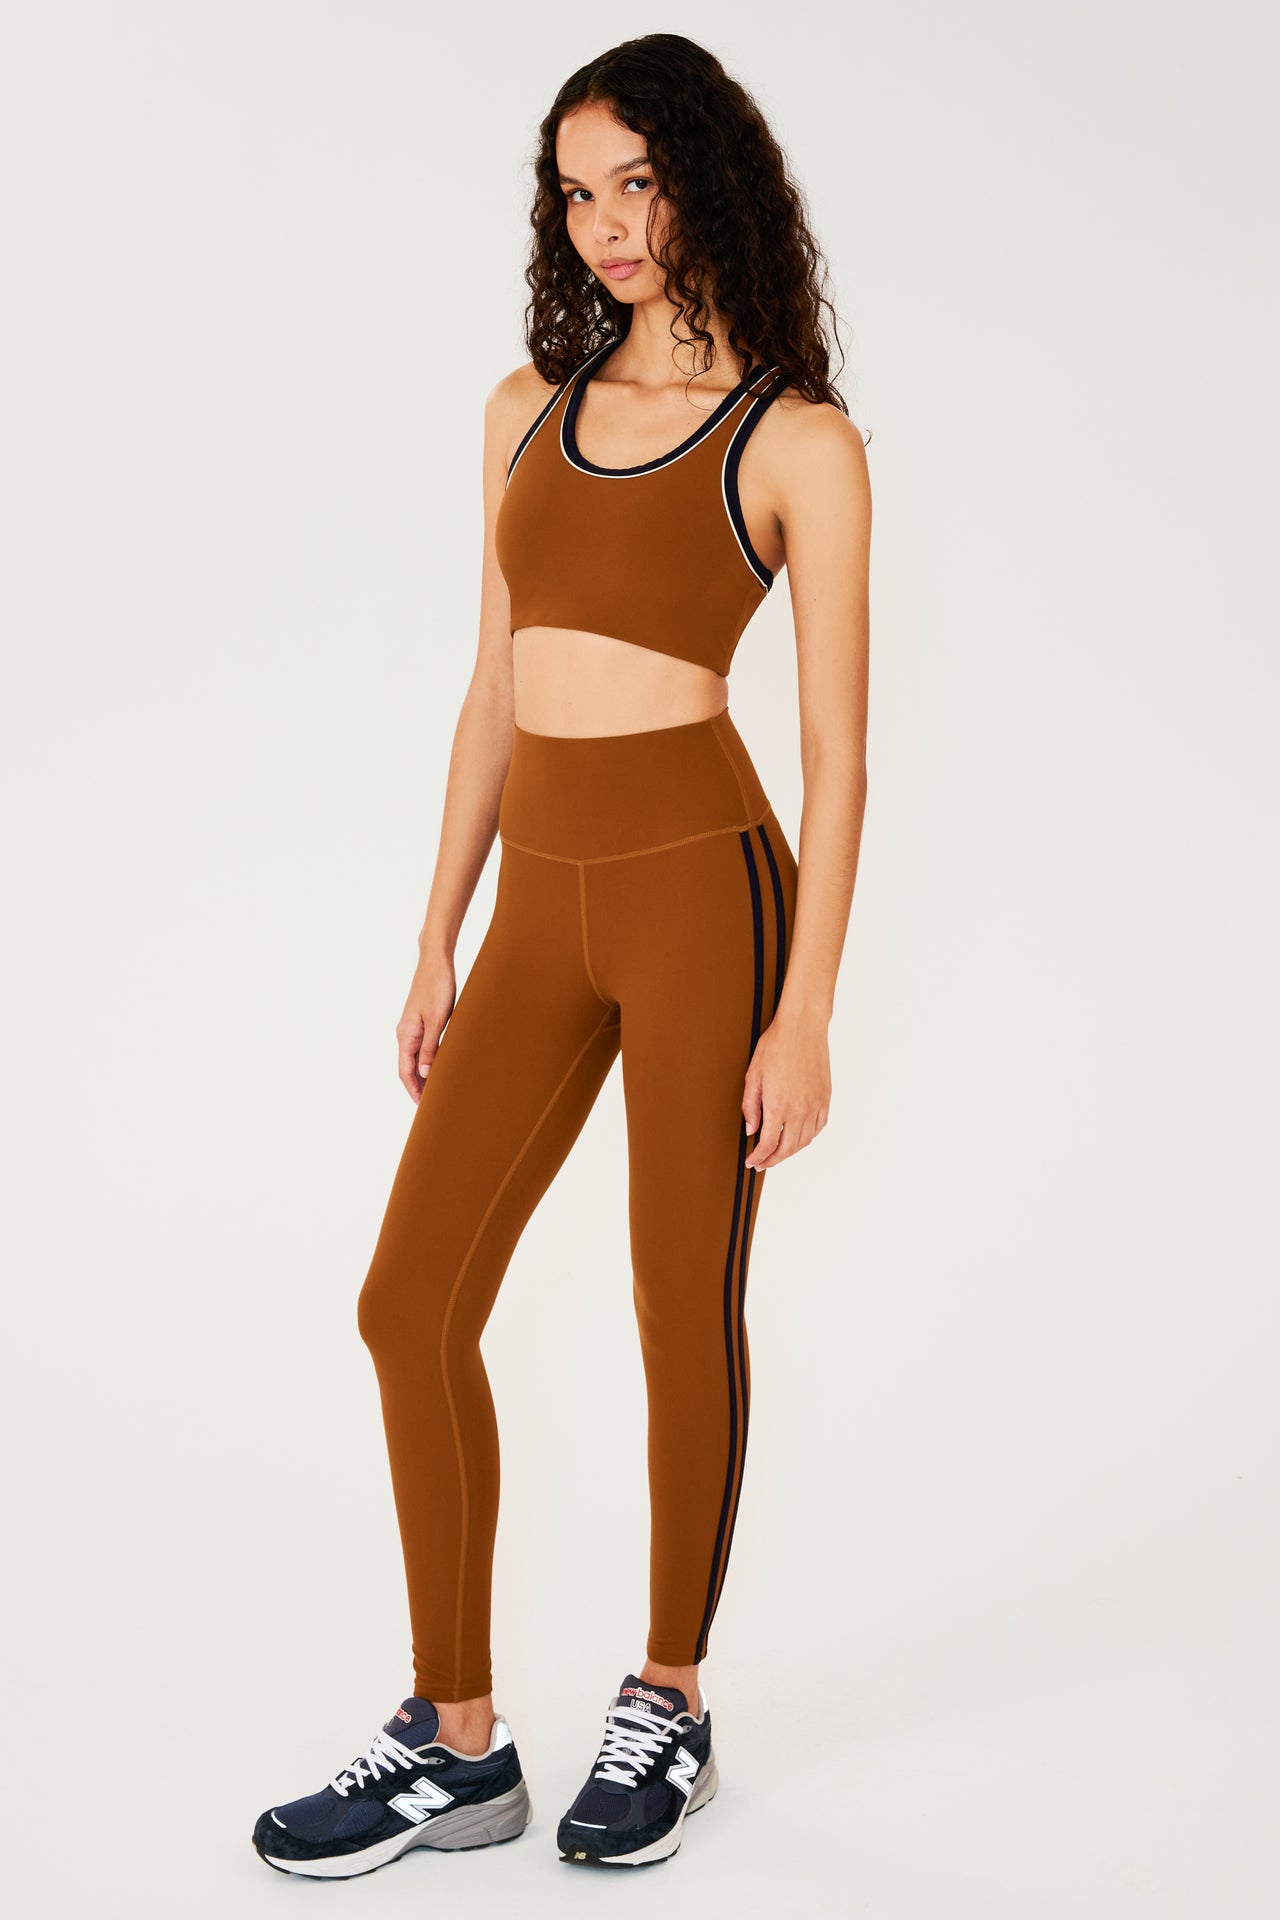 Full side view of girl wearing reddish brown leggings with two thin black stripes down the side and a reddish brown sports bra with dark blue shoes